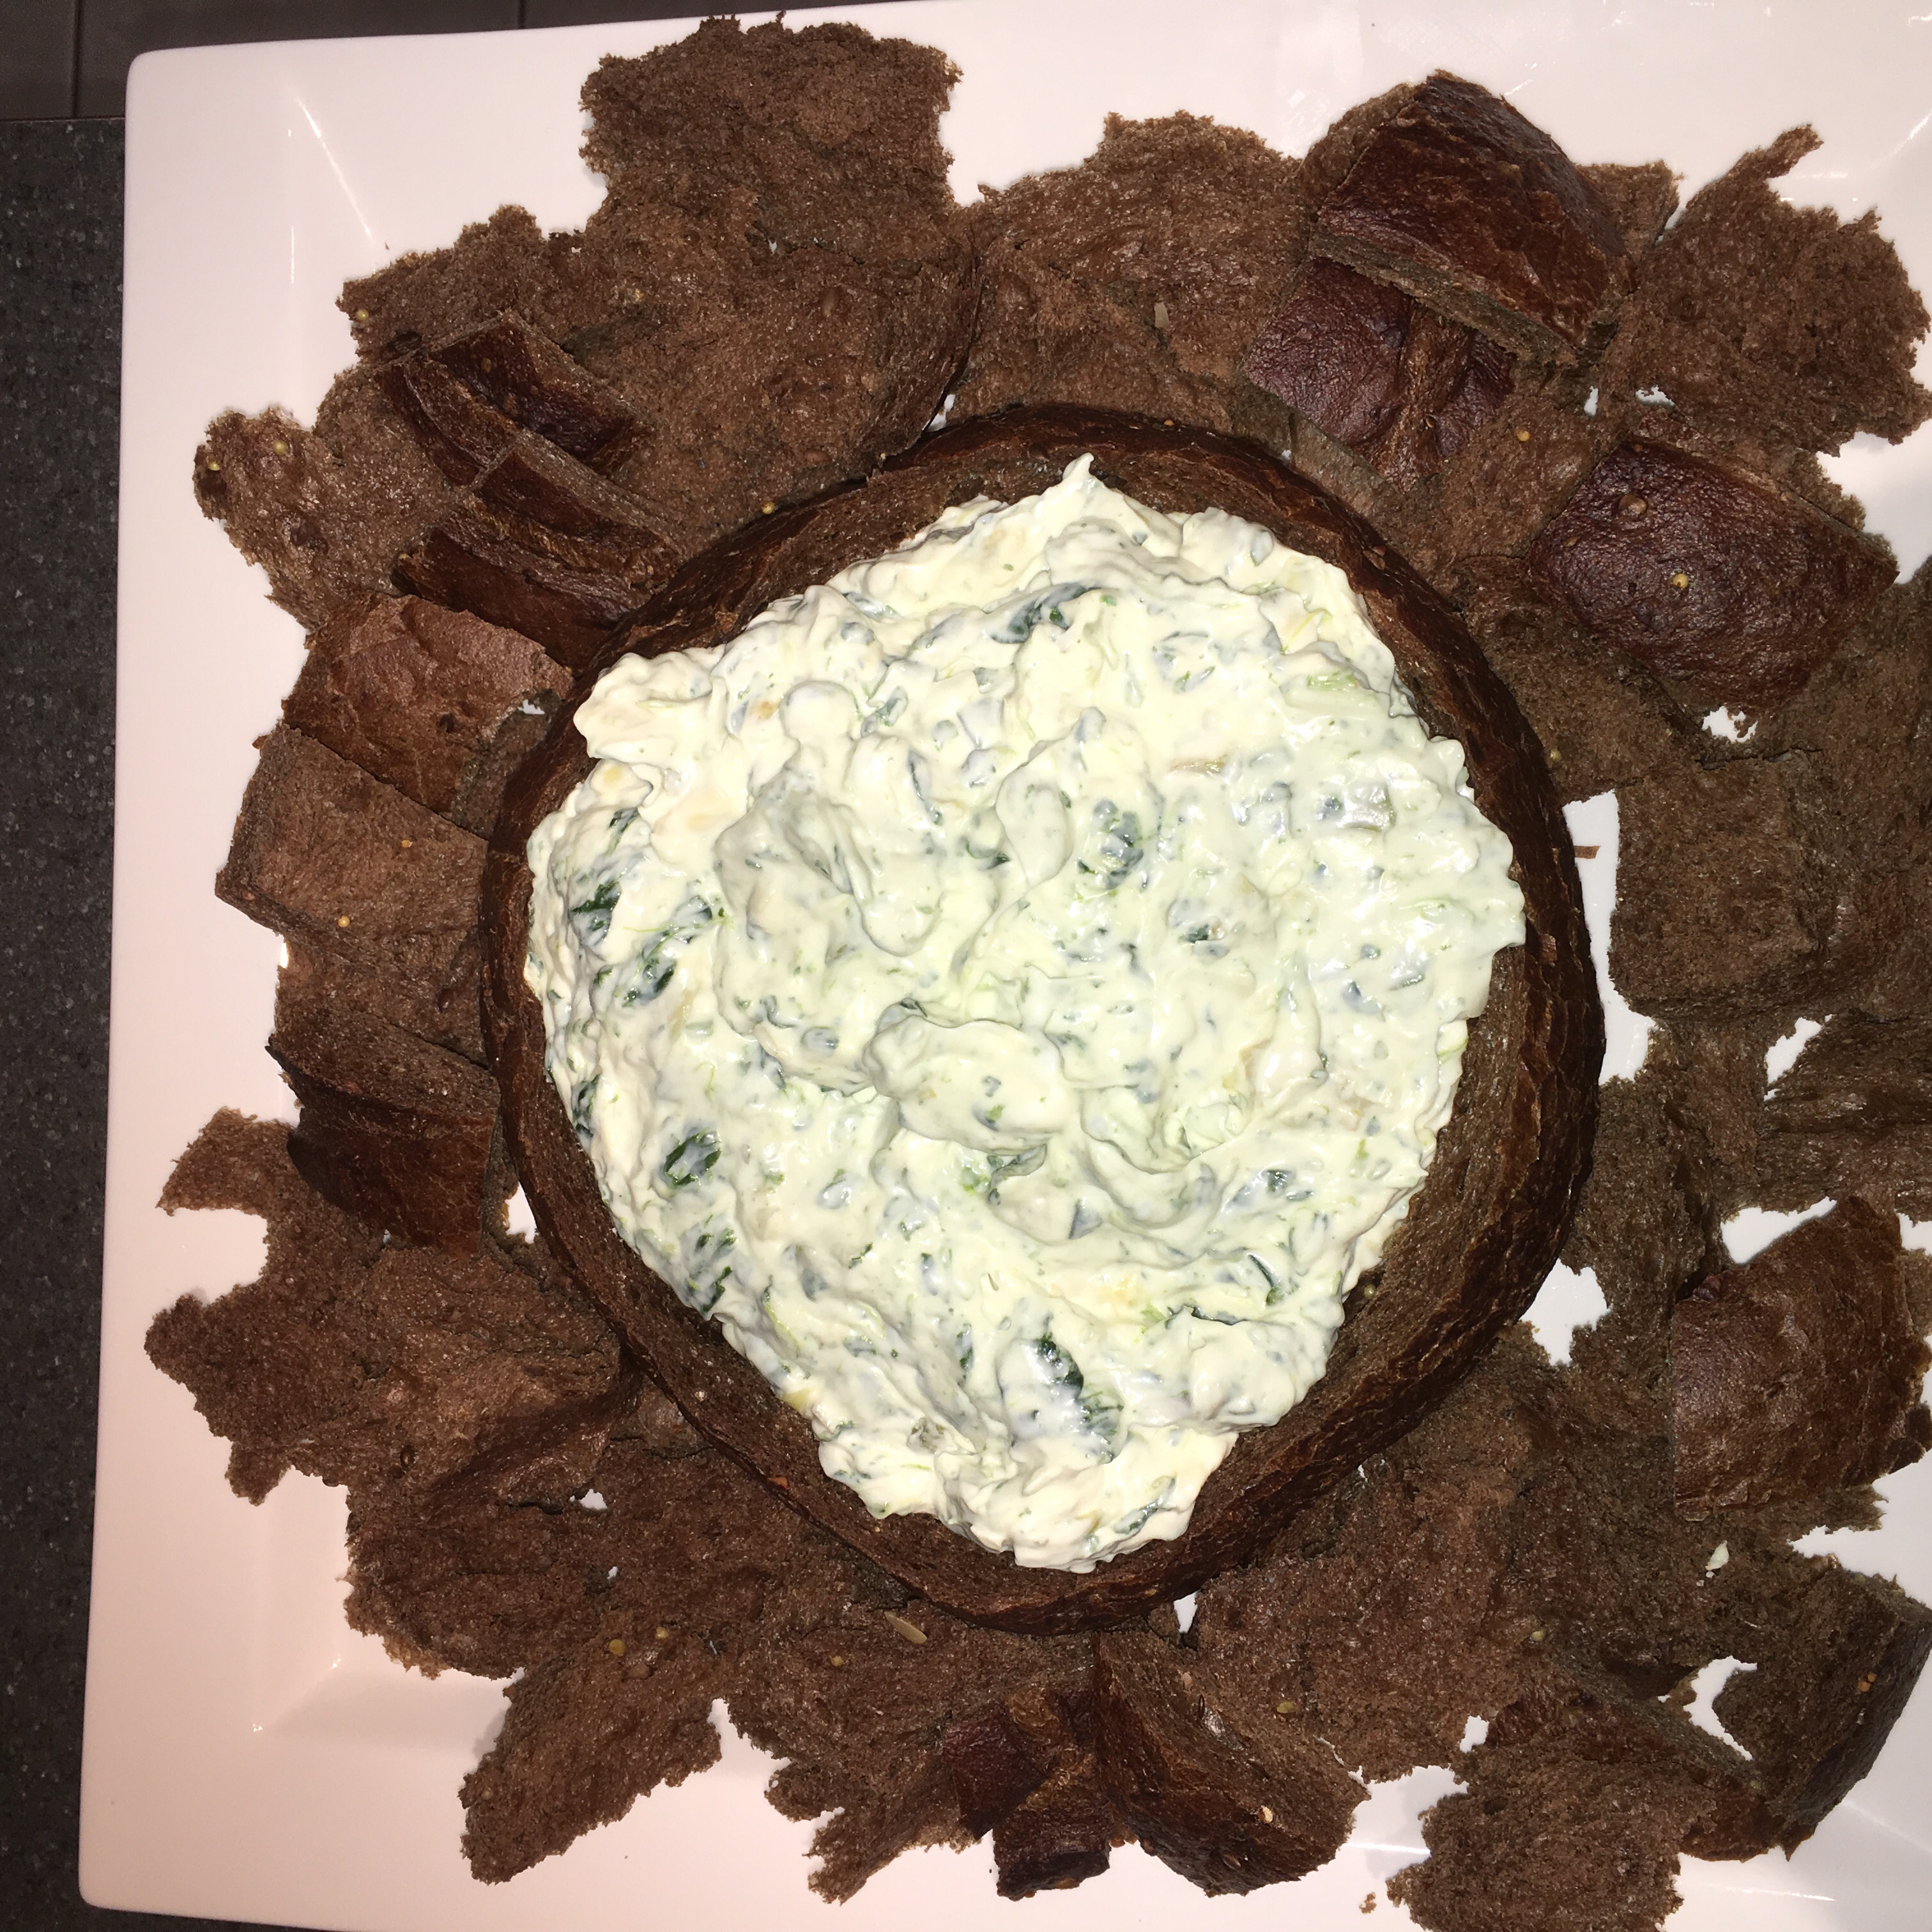 Best Spinach Dip Ever 